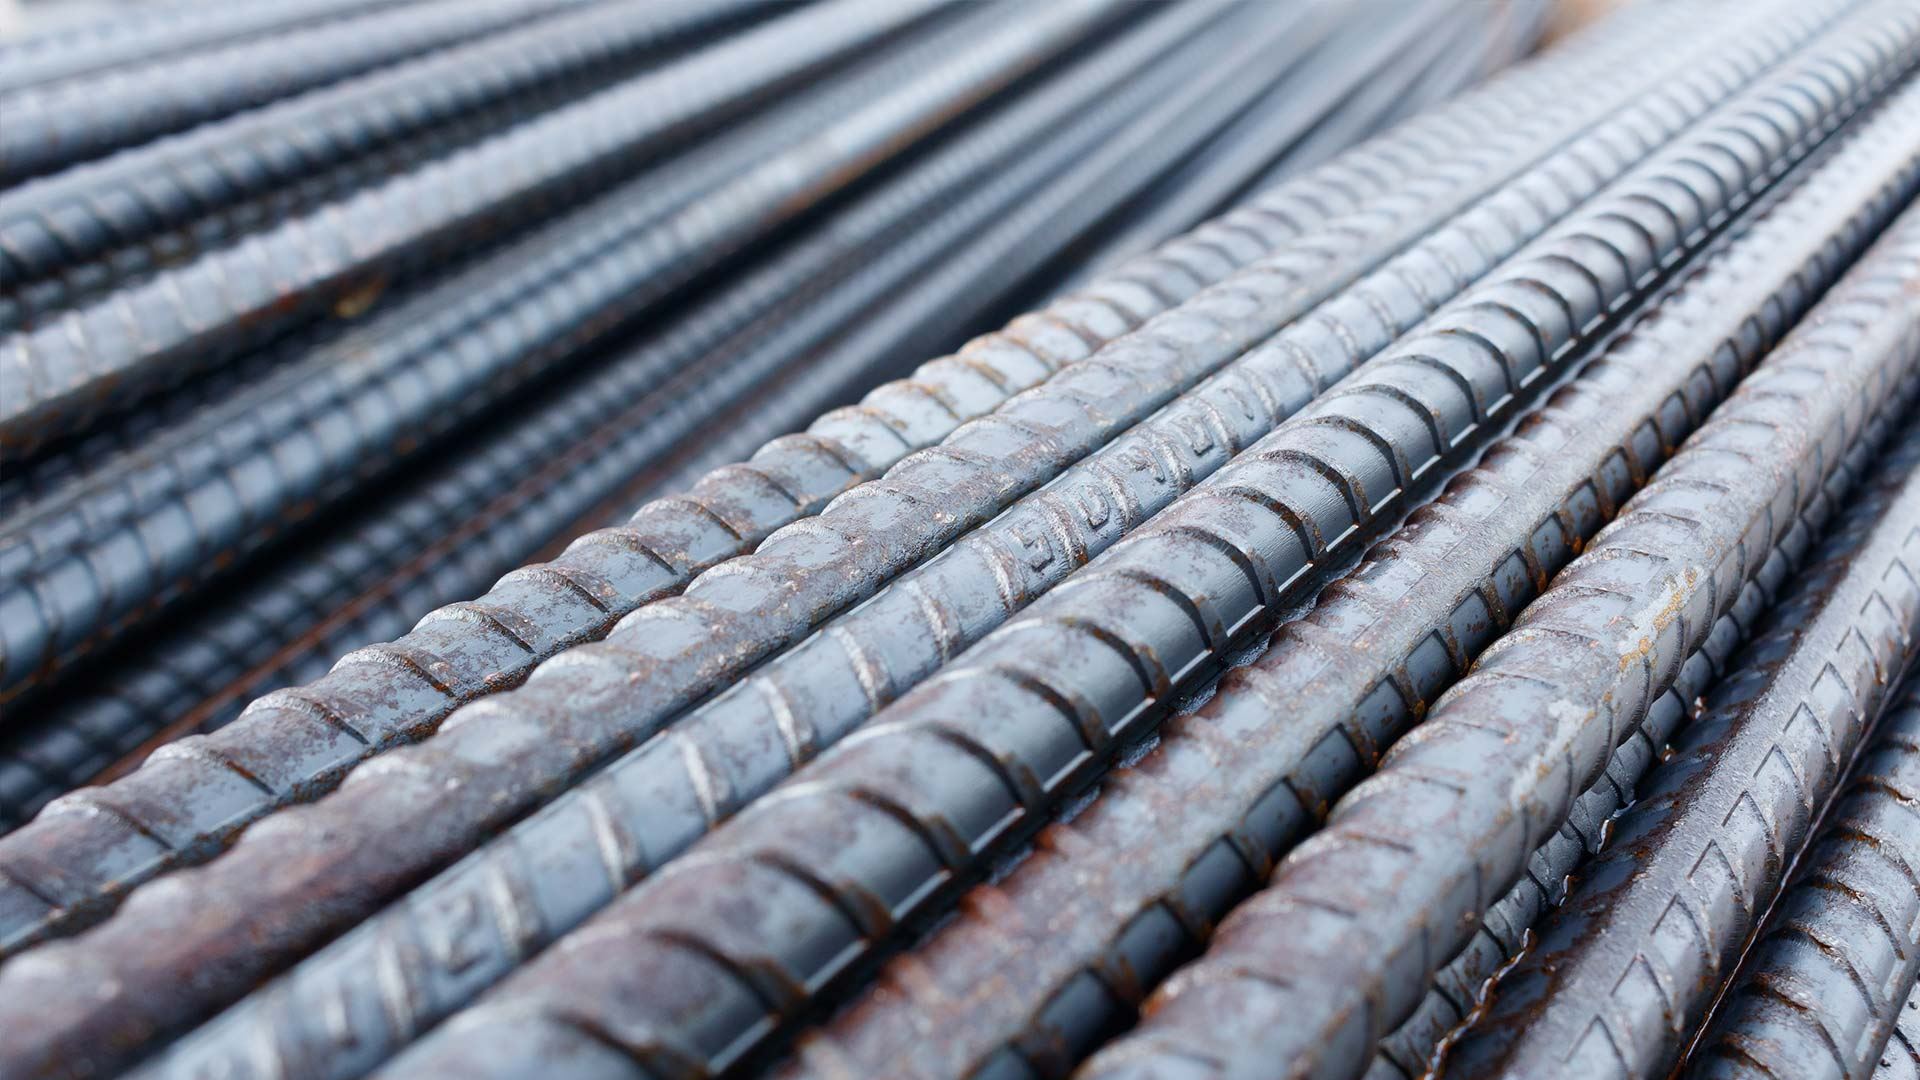 Russian rebar prices are on the rise